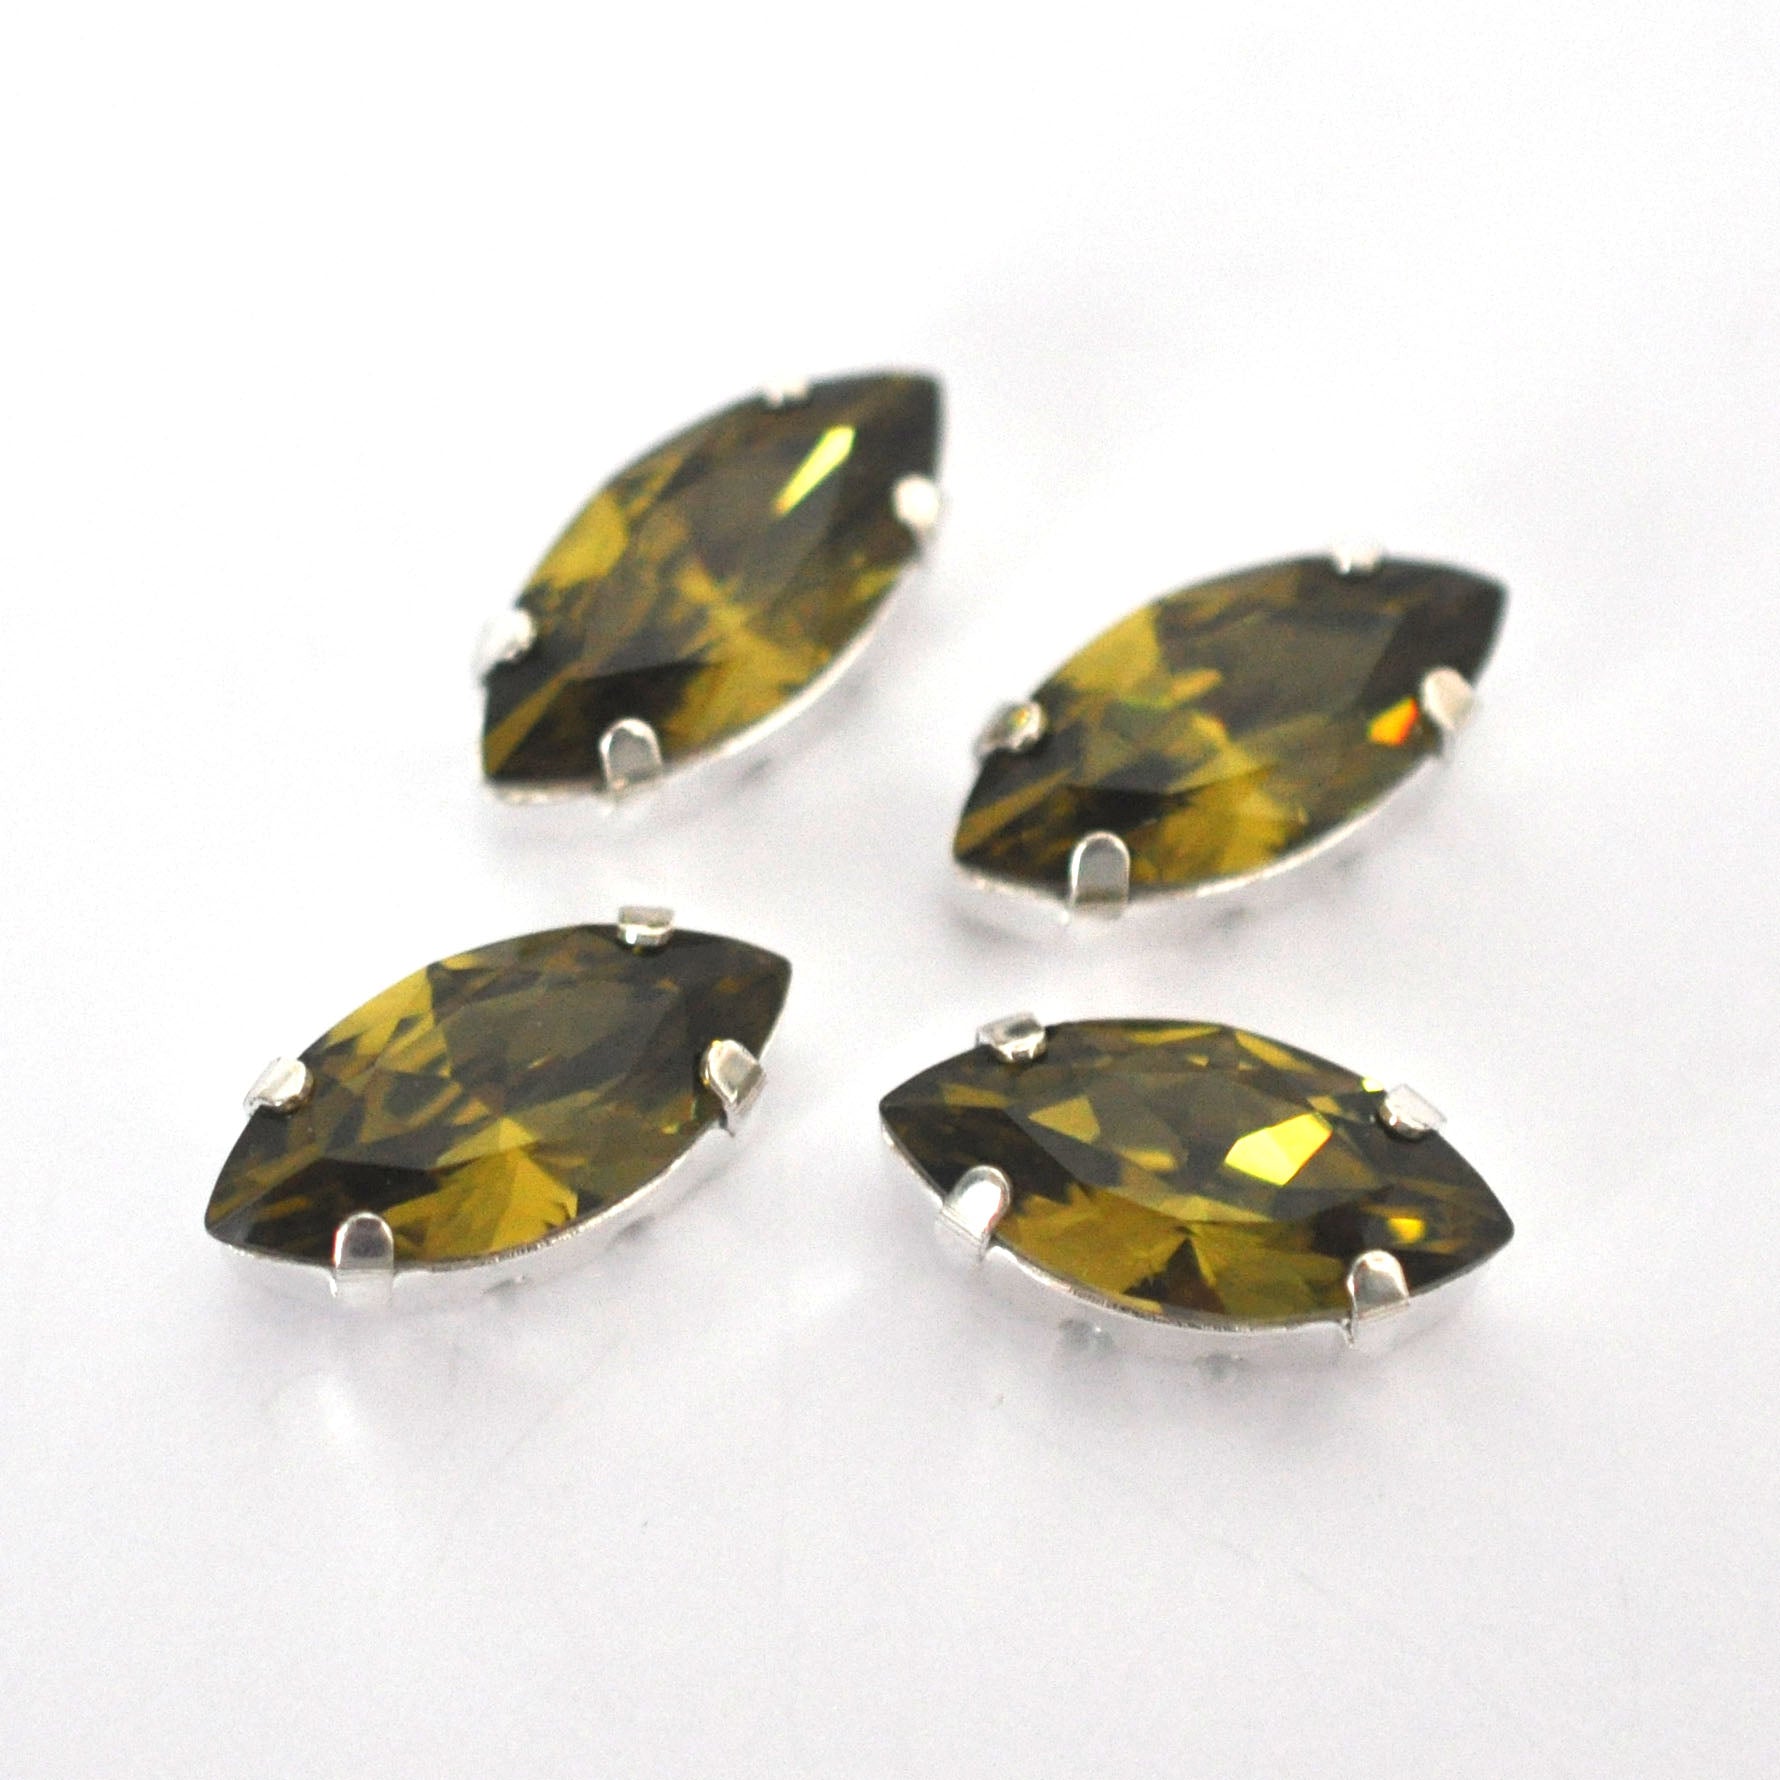 Khaki 15x7mm Navette Sew On Crystals - 4 Pieces